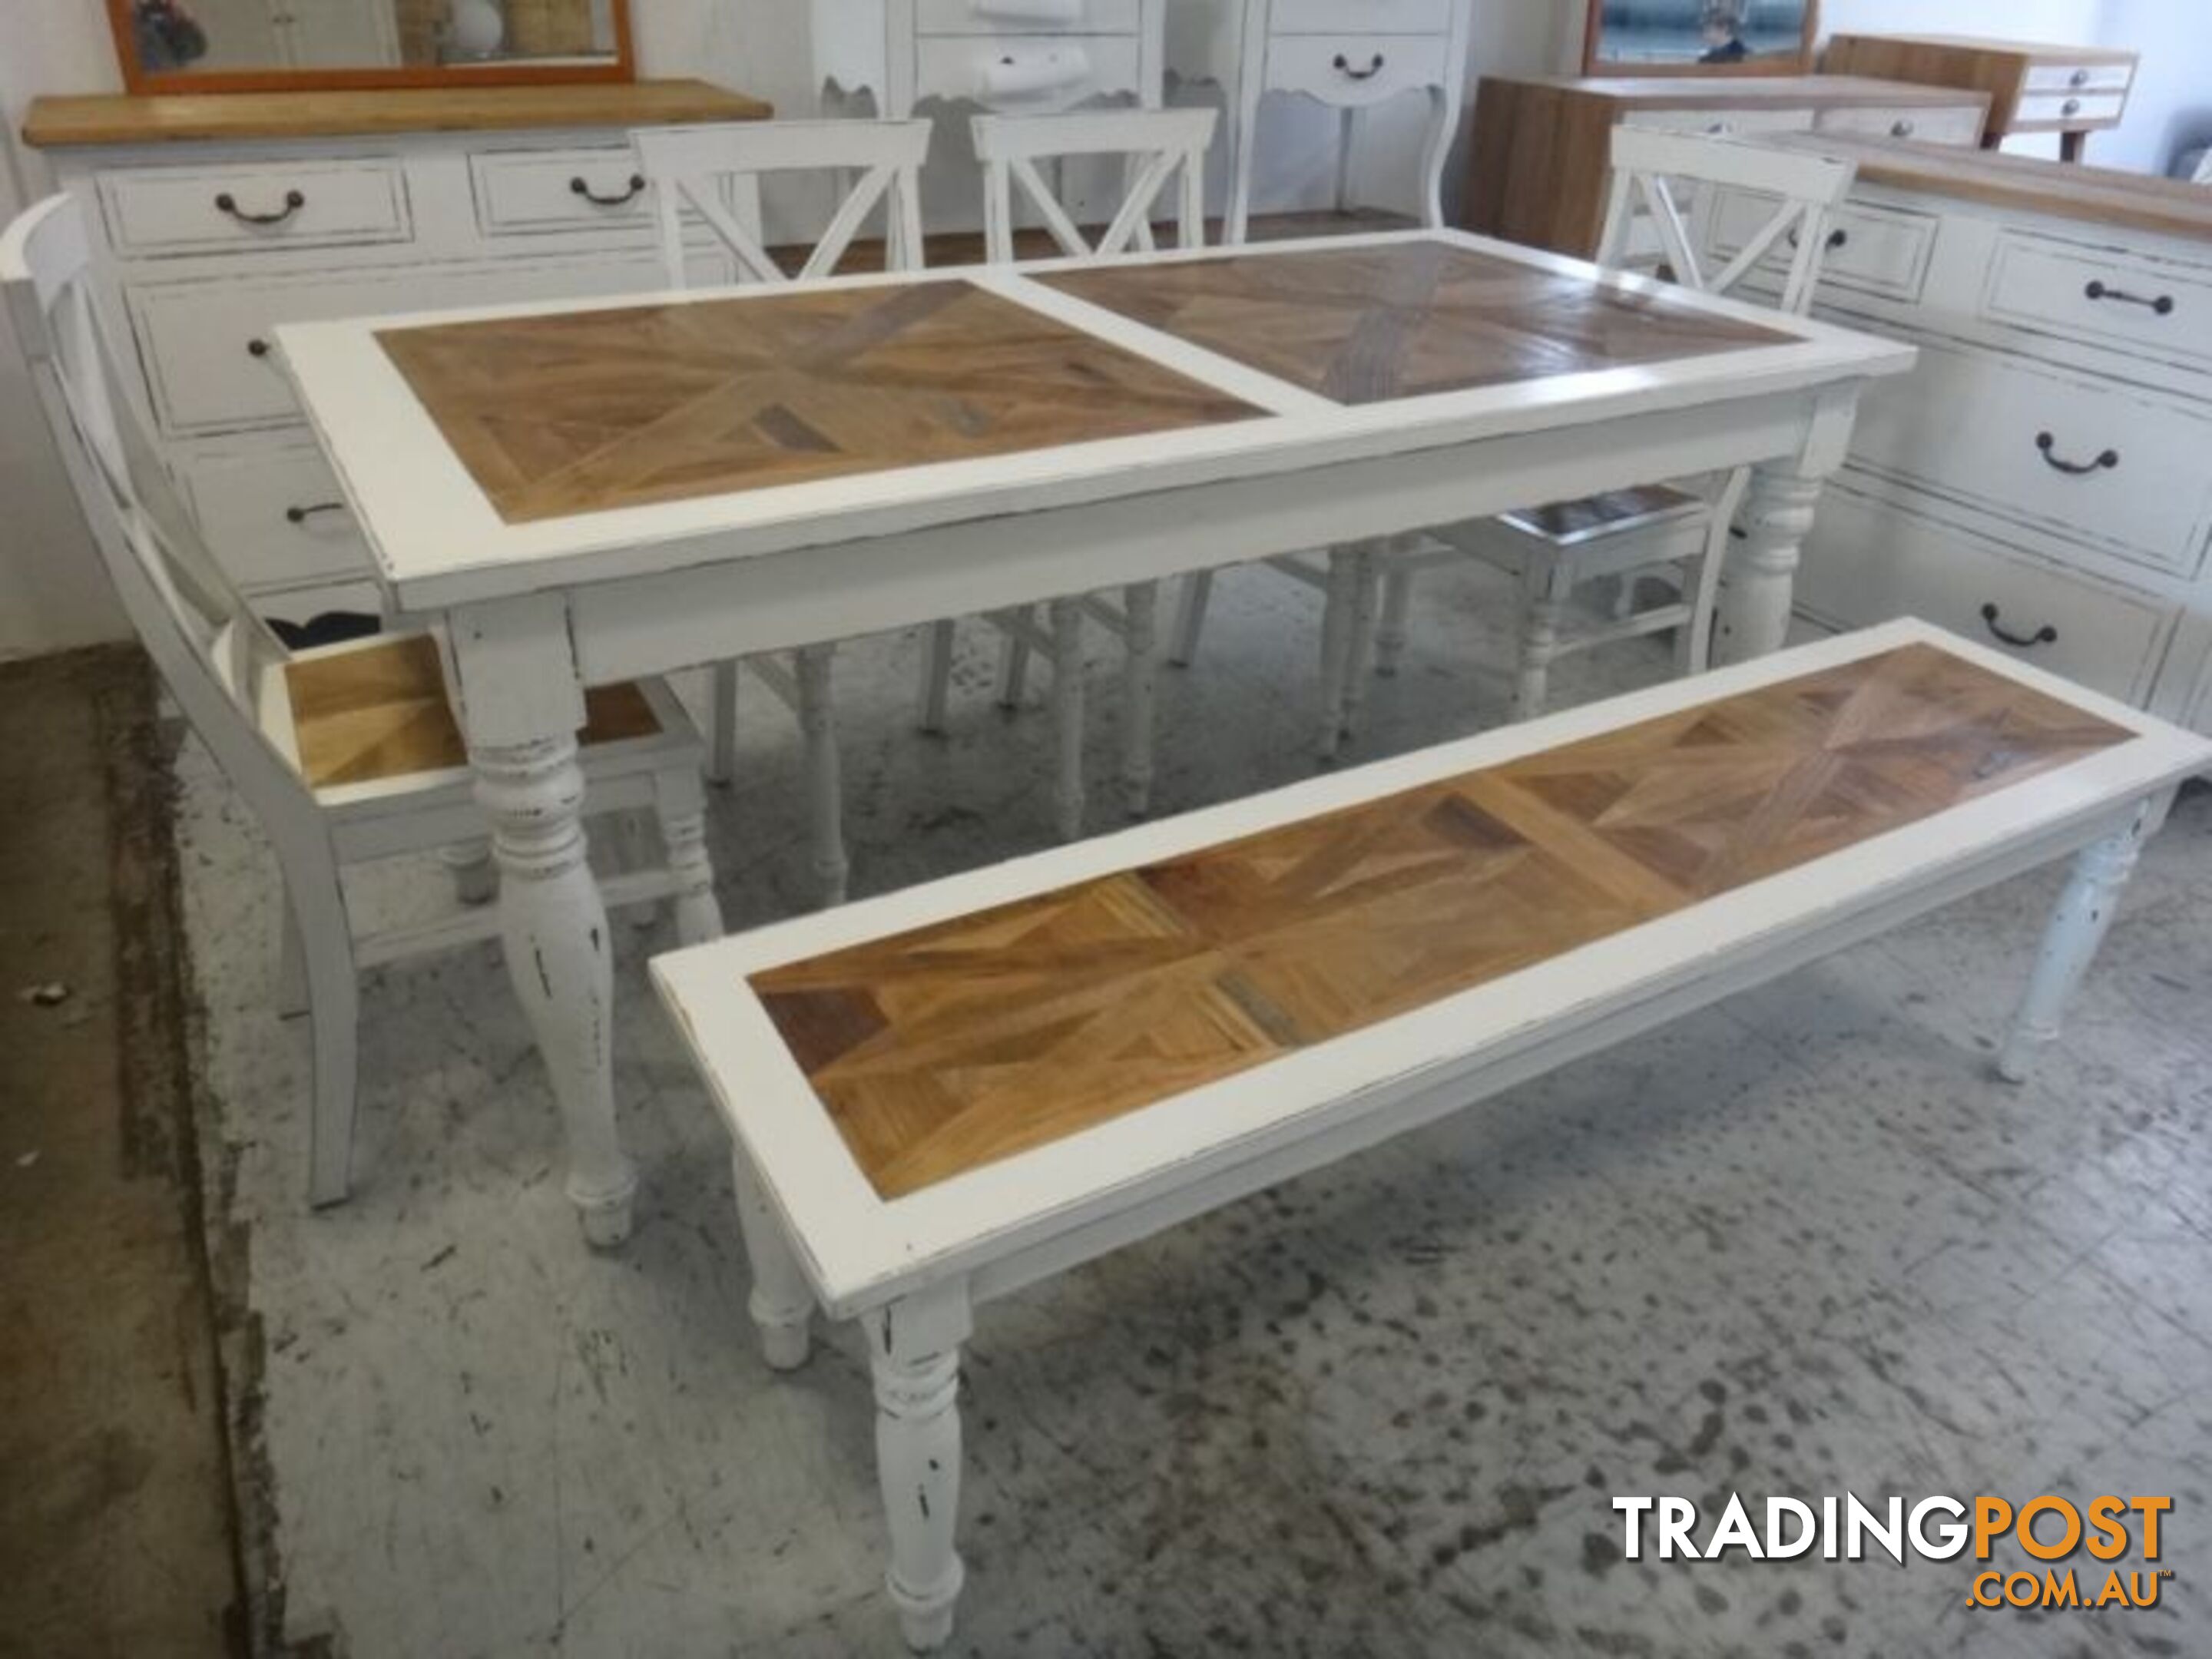 NEW BELMONT DINING TABLE - CHAIRS & BENCH SEATS AVAILABLE